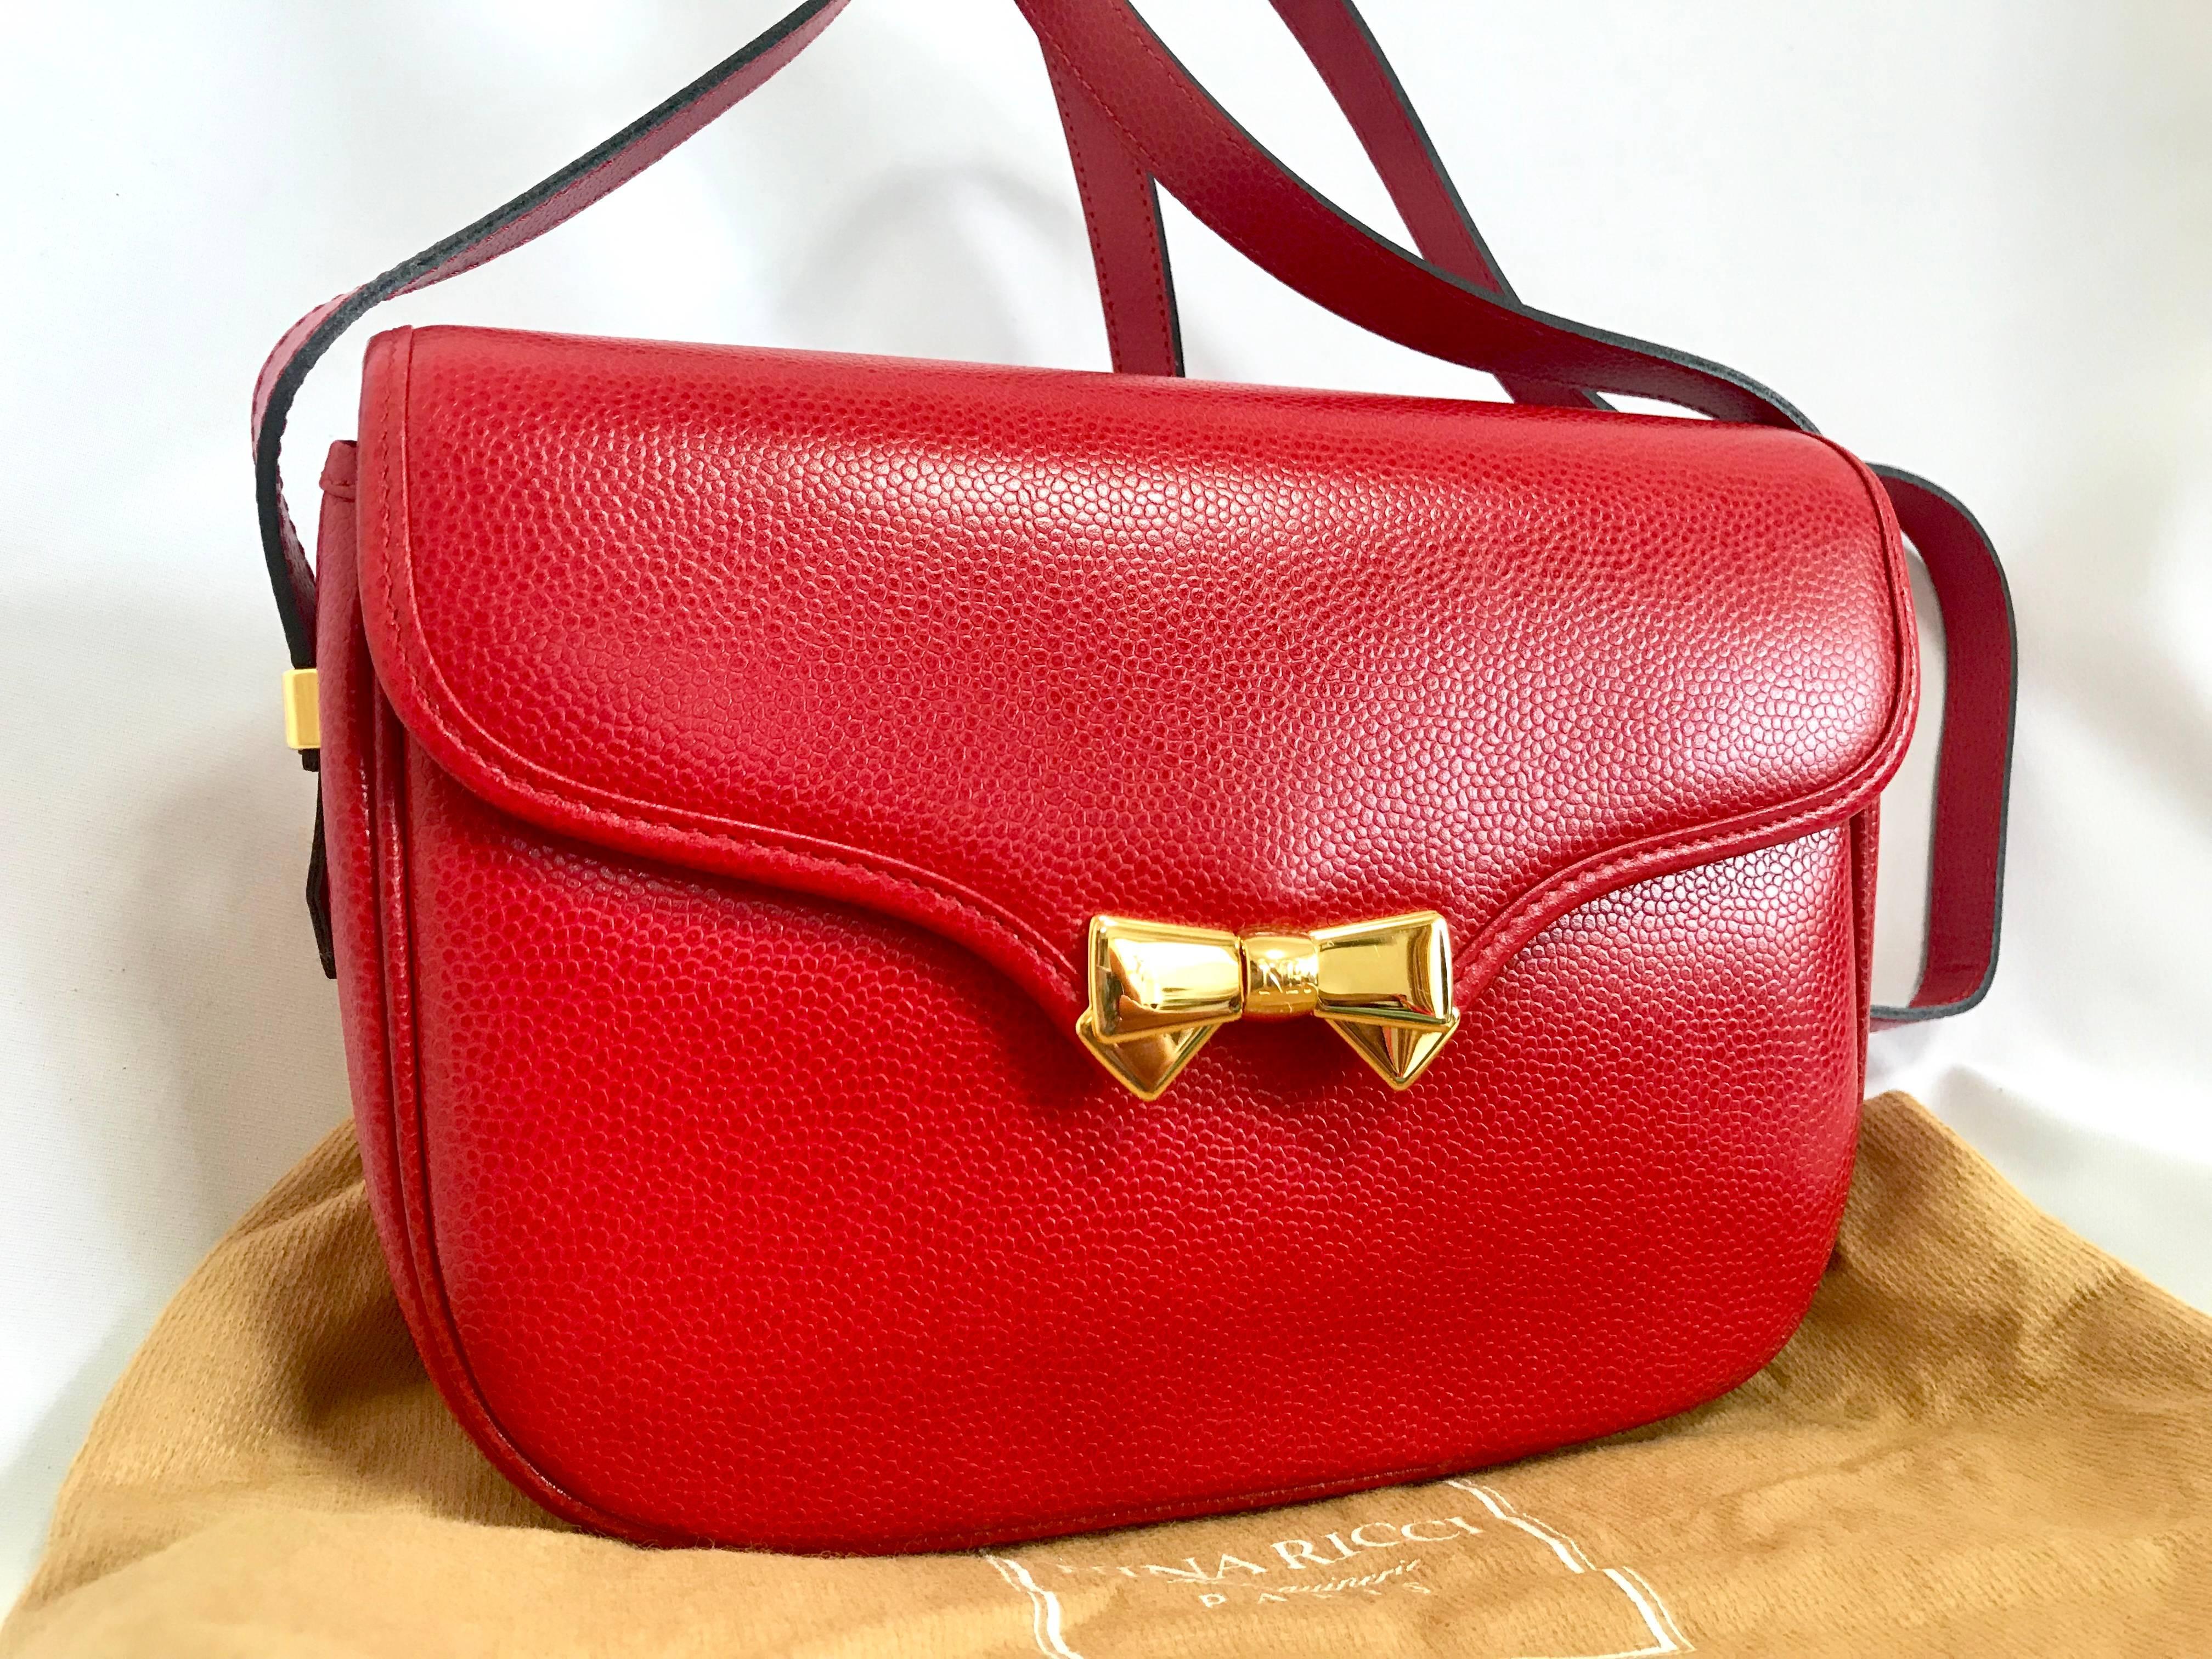 1990s. MINT. Vintage Nina Ricci red grained leather shoulder bag with golden logo bow motifs. So chic. Must have daily purse.

This is a vintage NINA RICCI, cute shape red leather shoudlet purse with golden bow logo motifs! NEW/ Never used excellent